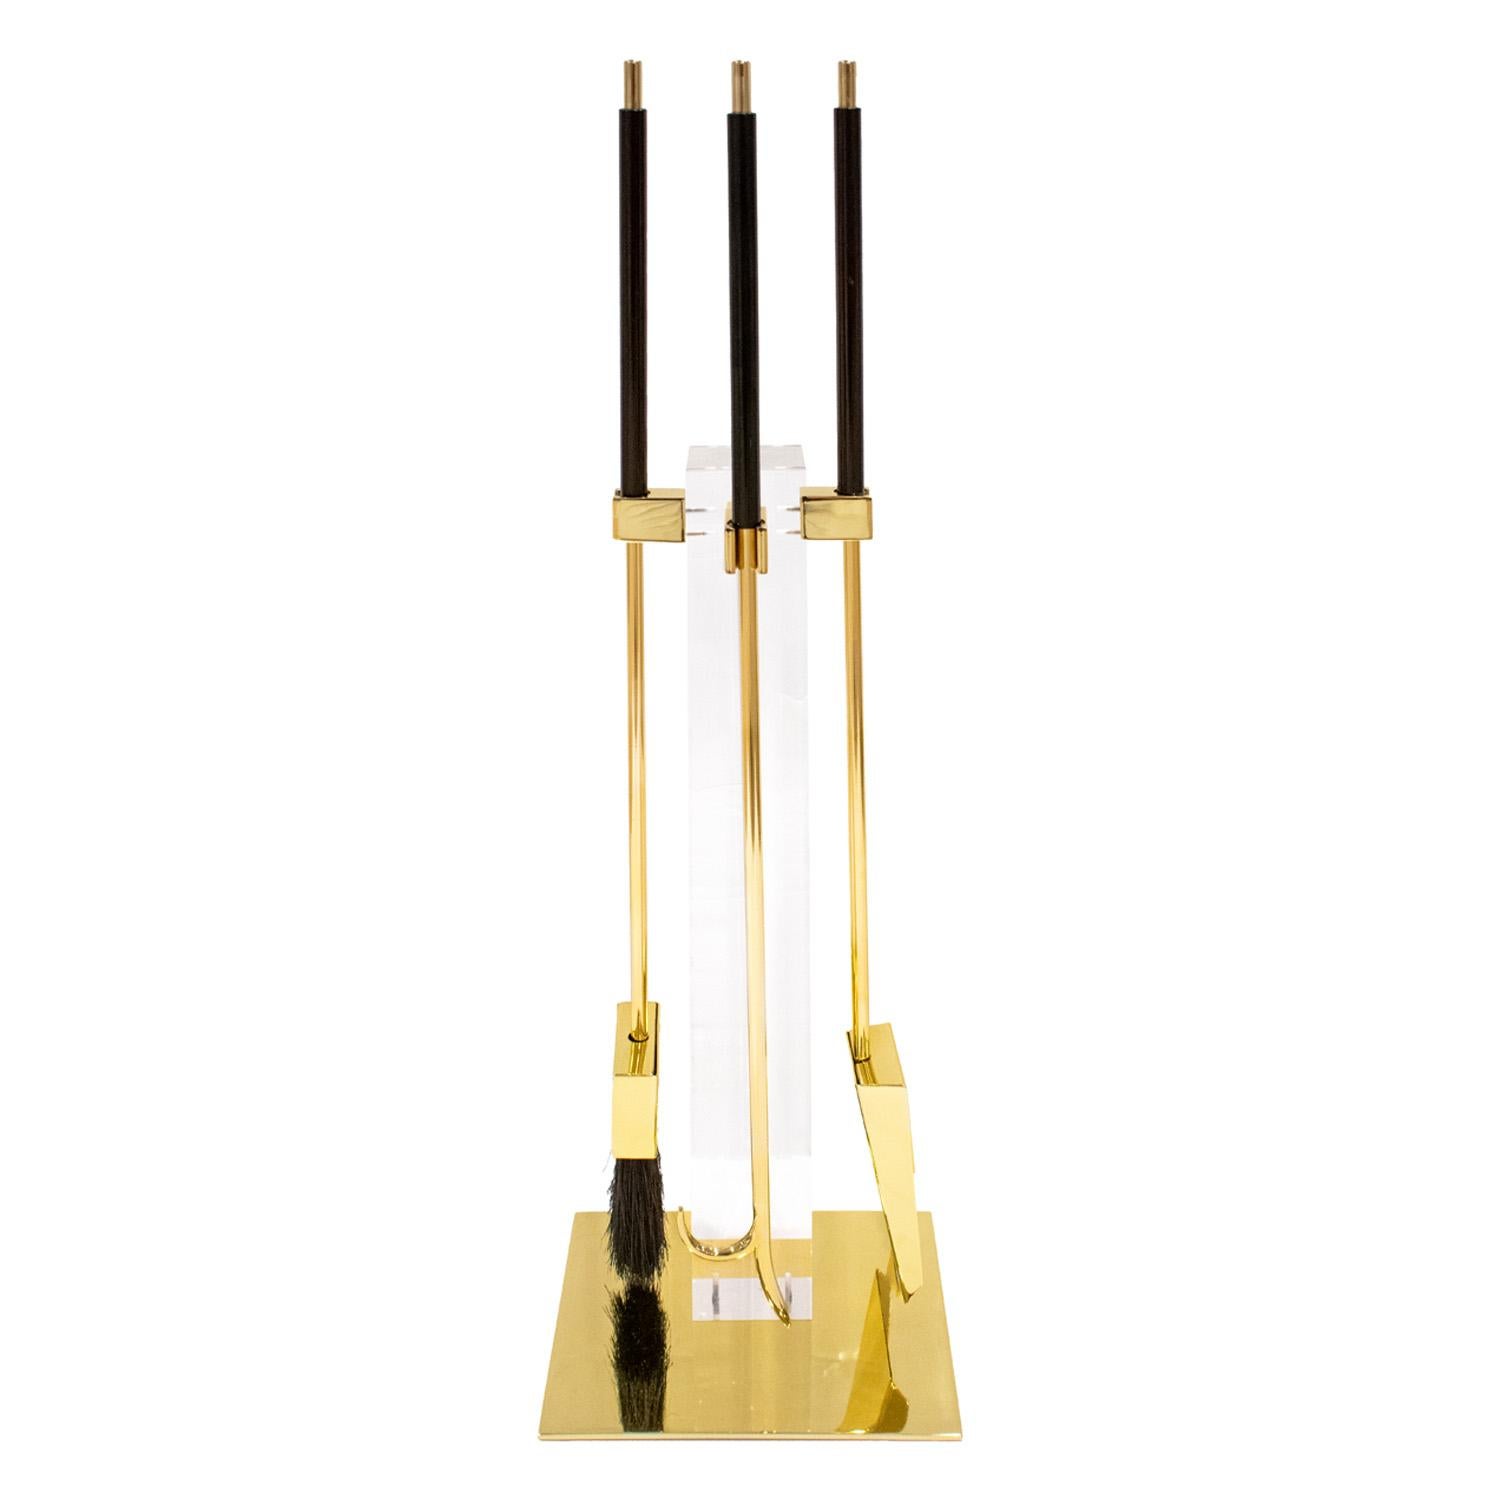 Fireplace tool set with upright post in lucite and tools in brass with black resin handles by Danny Alessandro LTD, American 1980's.  This iconic tool set is both useful and very chic. Danny Alessandro, Ltd. was sold through Holly Hunt in the